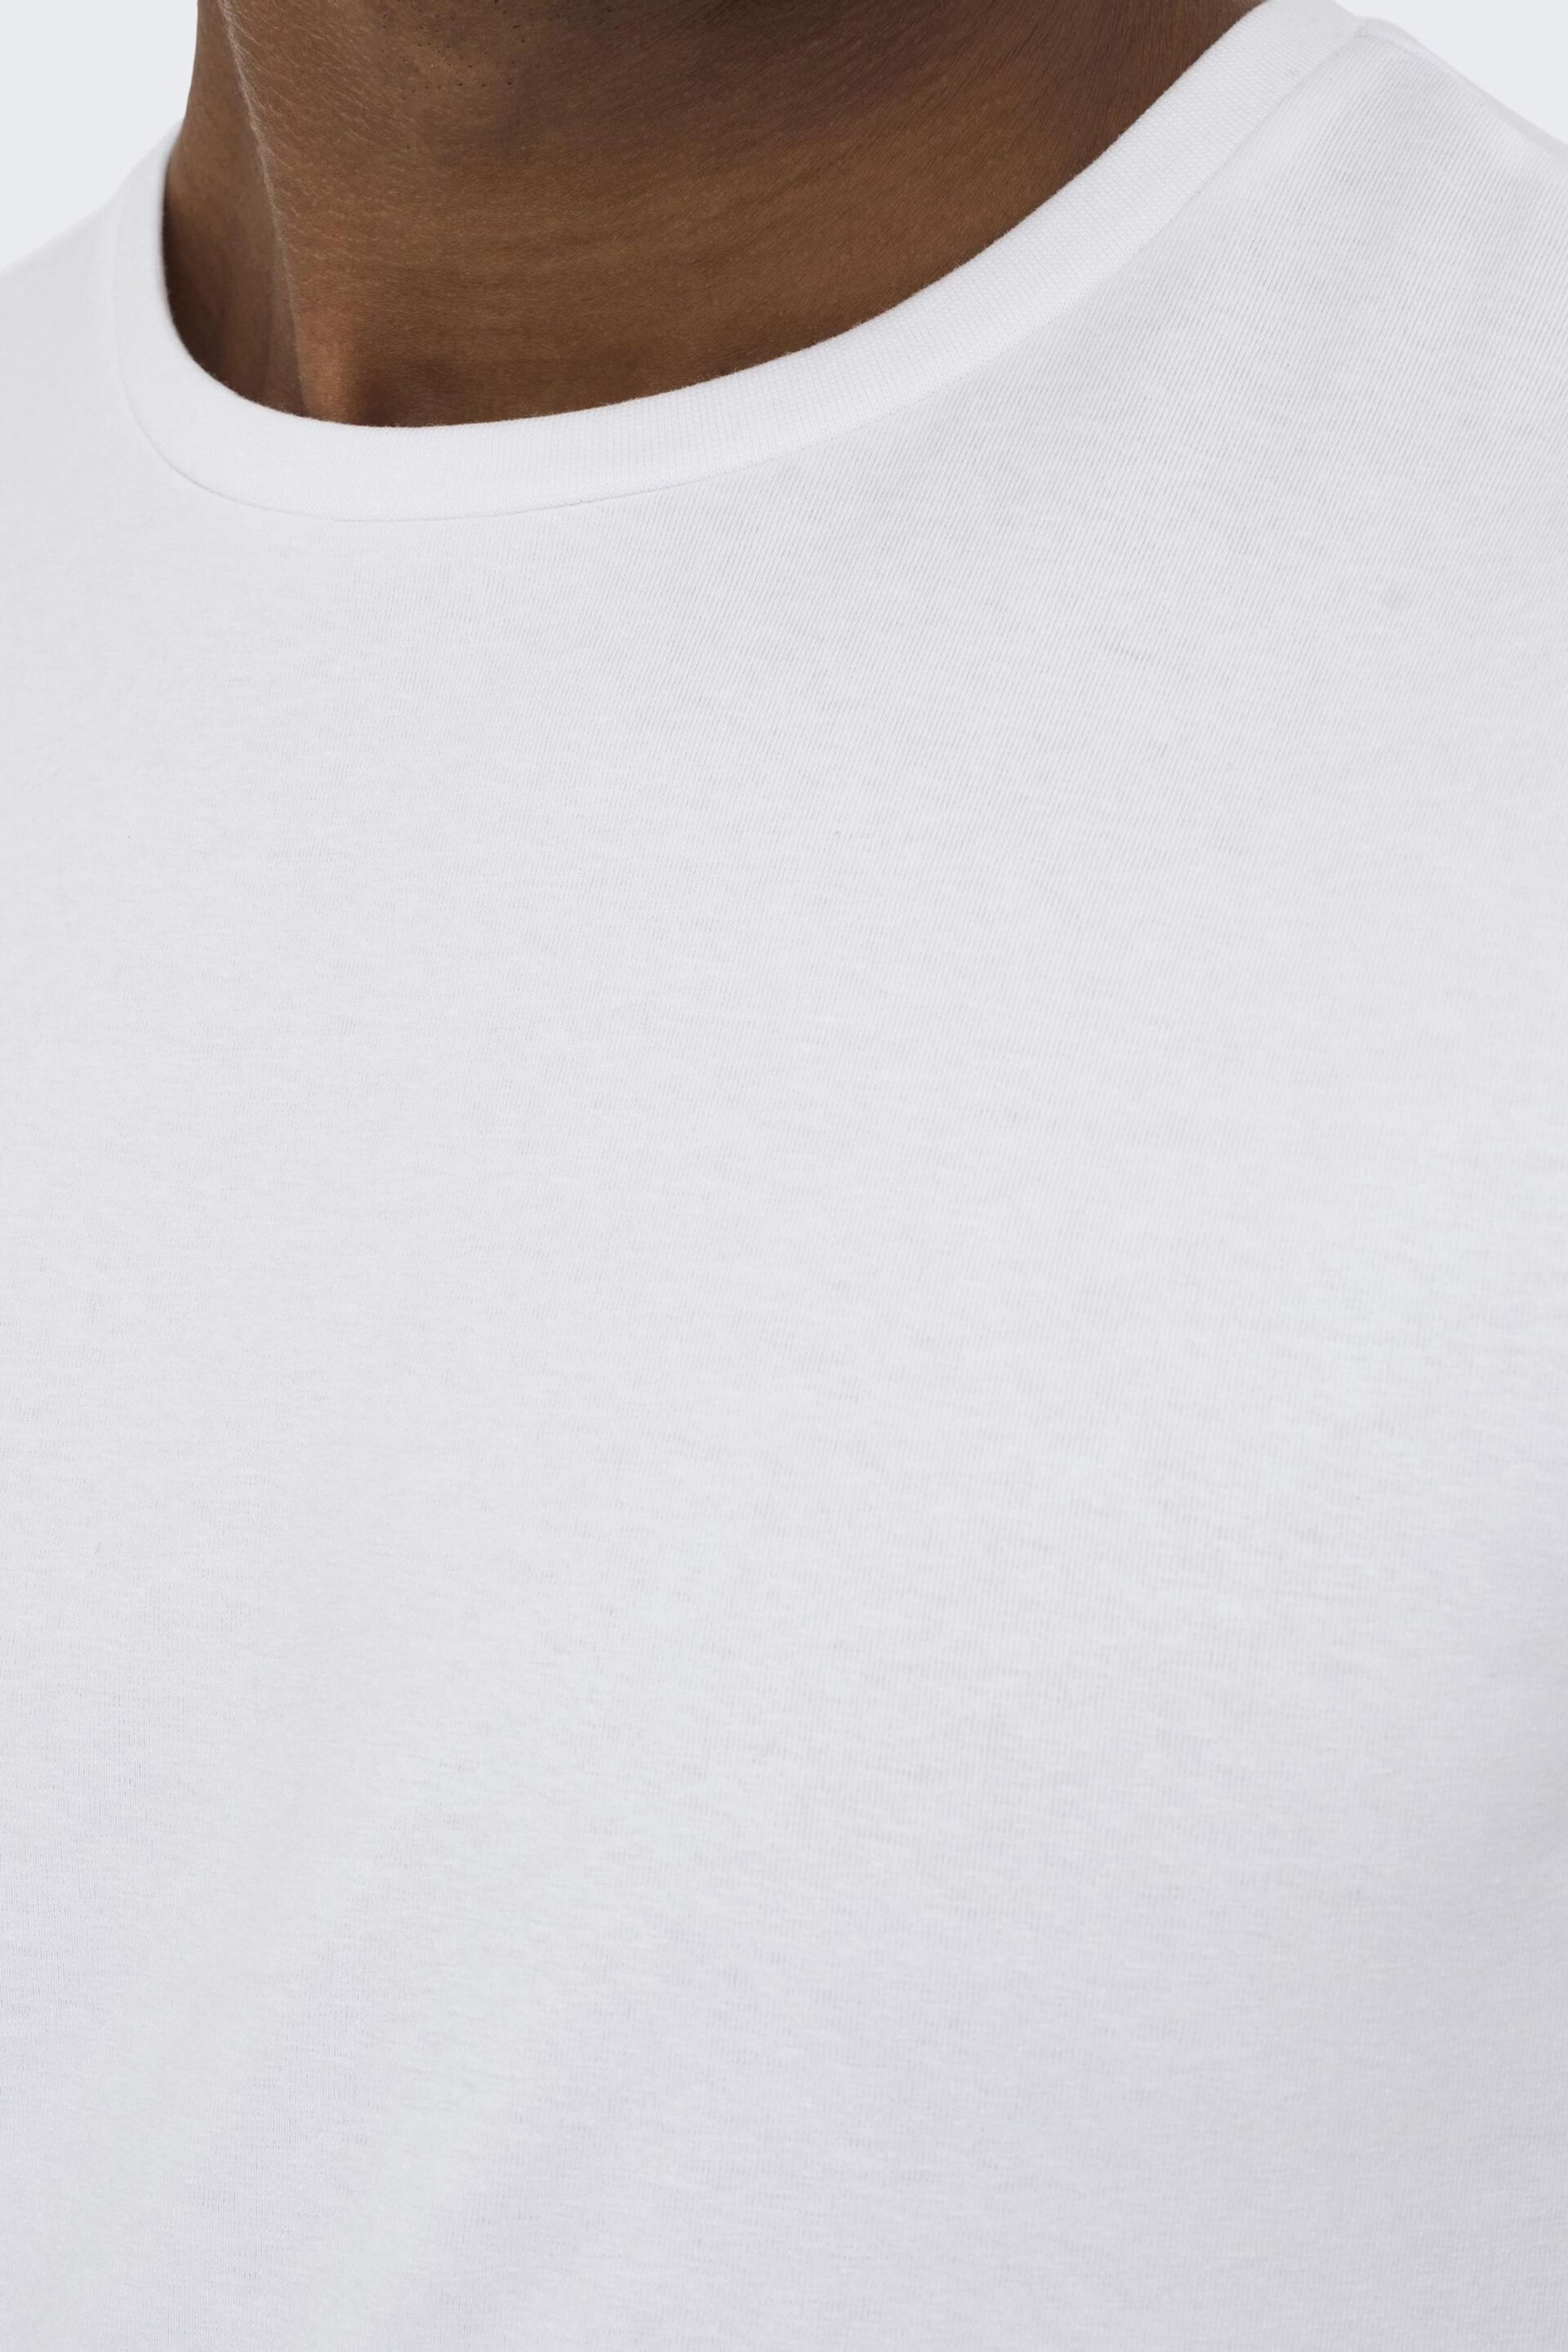 Only & Sons White 2 Pack Oversized Heavy Weight T-Shirt - Image 4 of 6